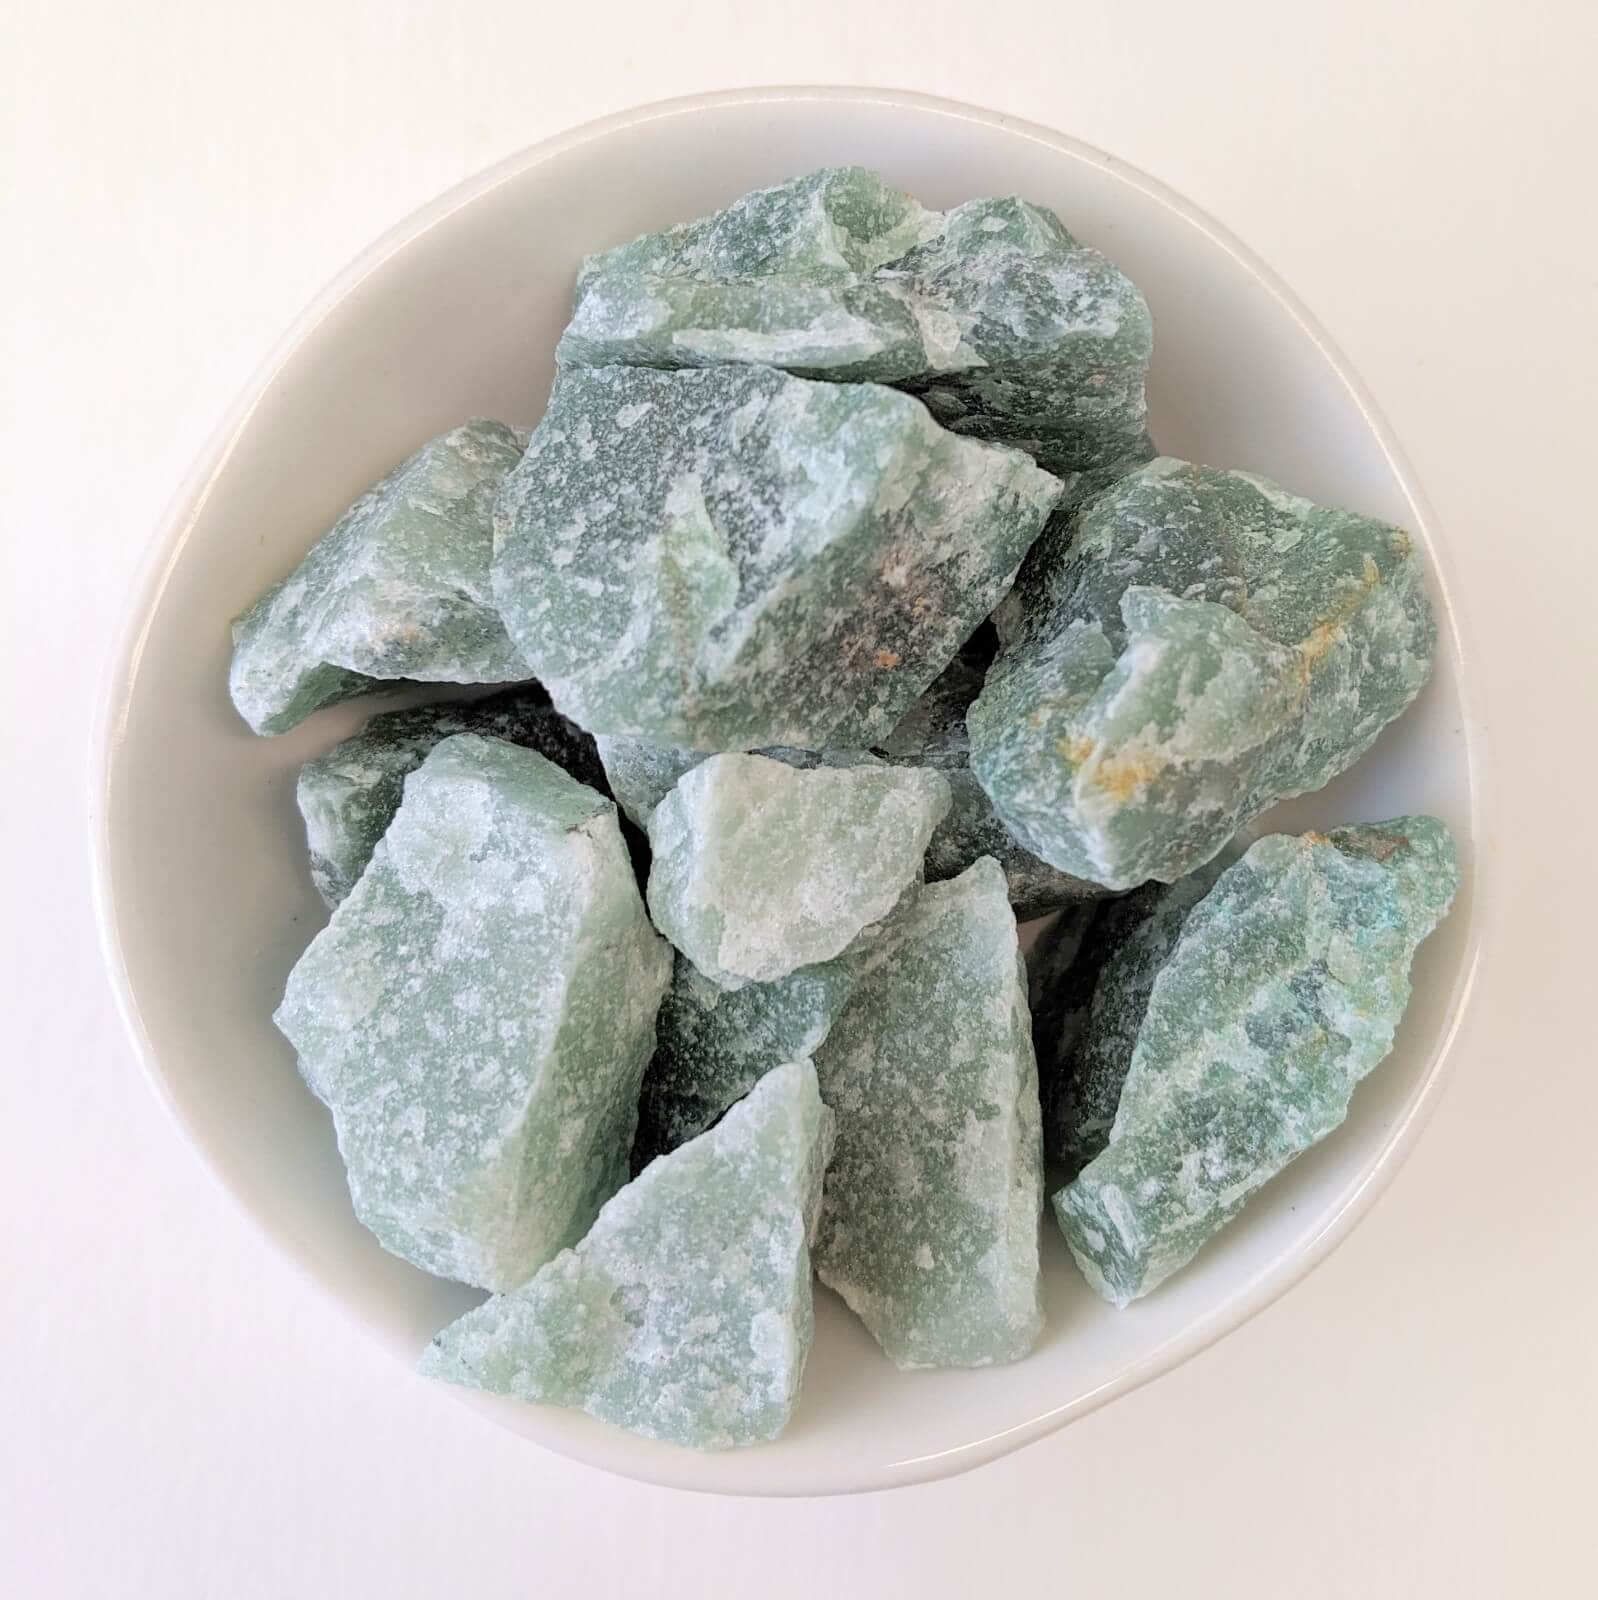 Aventurine Green Crystals Raw In A White Bowl - Top View